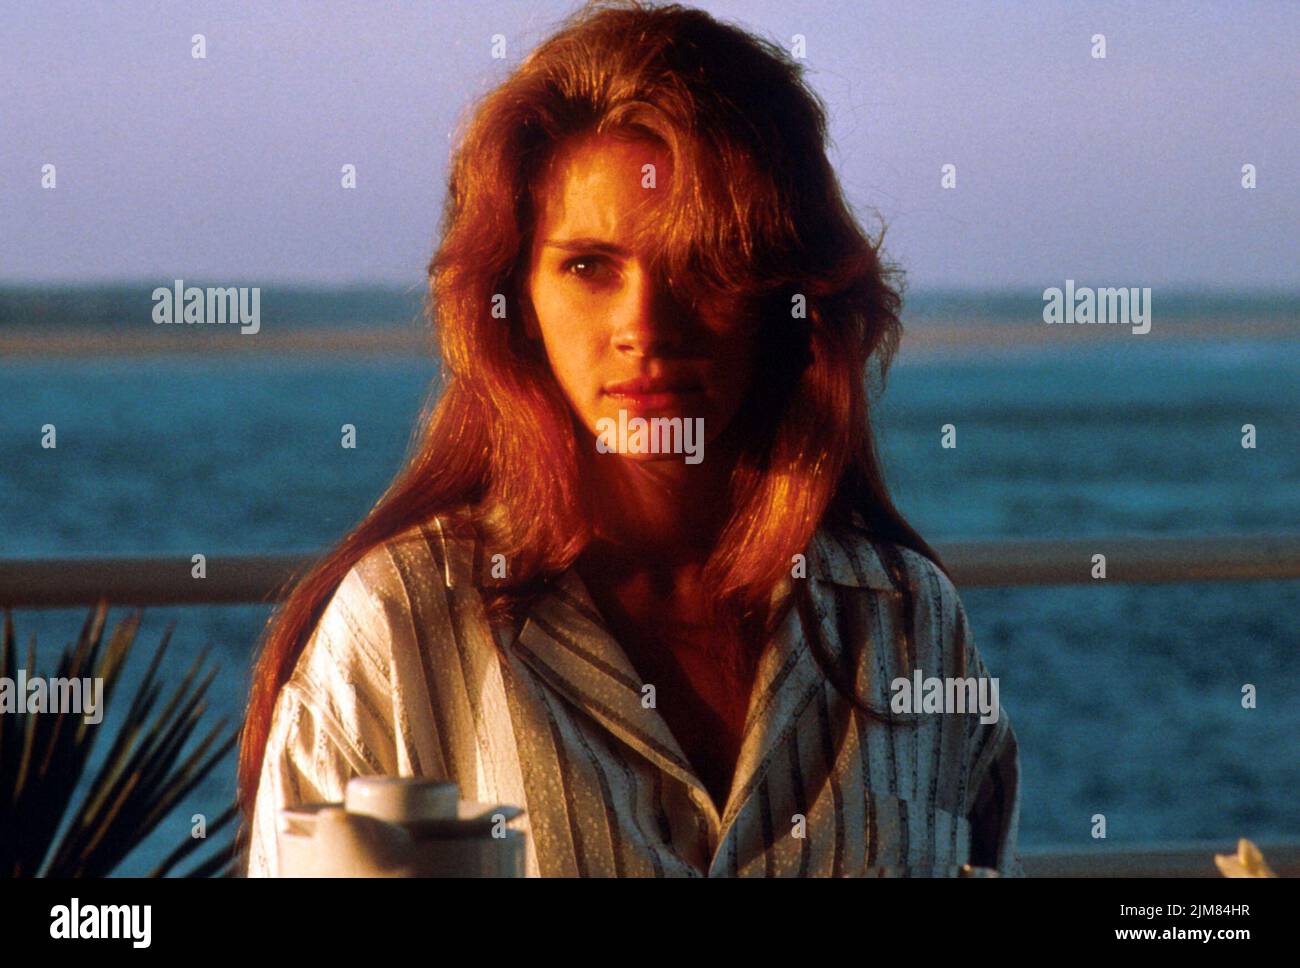 JULIA ROBERTS in SLEEPING WITH THE ENEMY (1991), directed by JOSEPH RUBEN. Credit: 20TH CENTURY FOX / Album Stock Photo